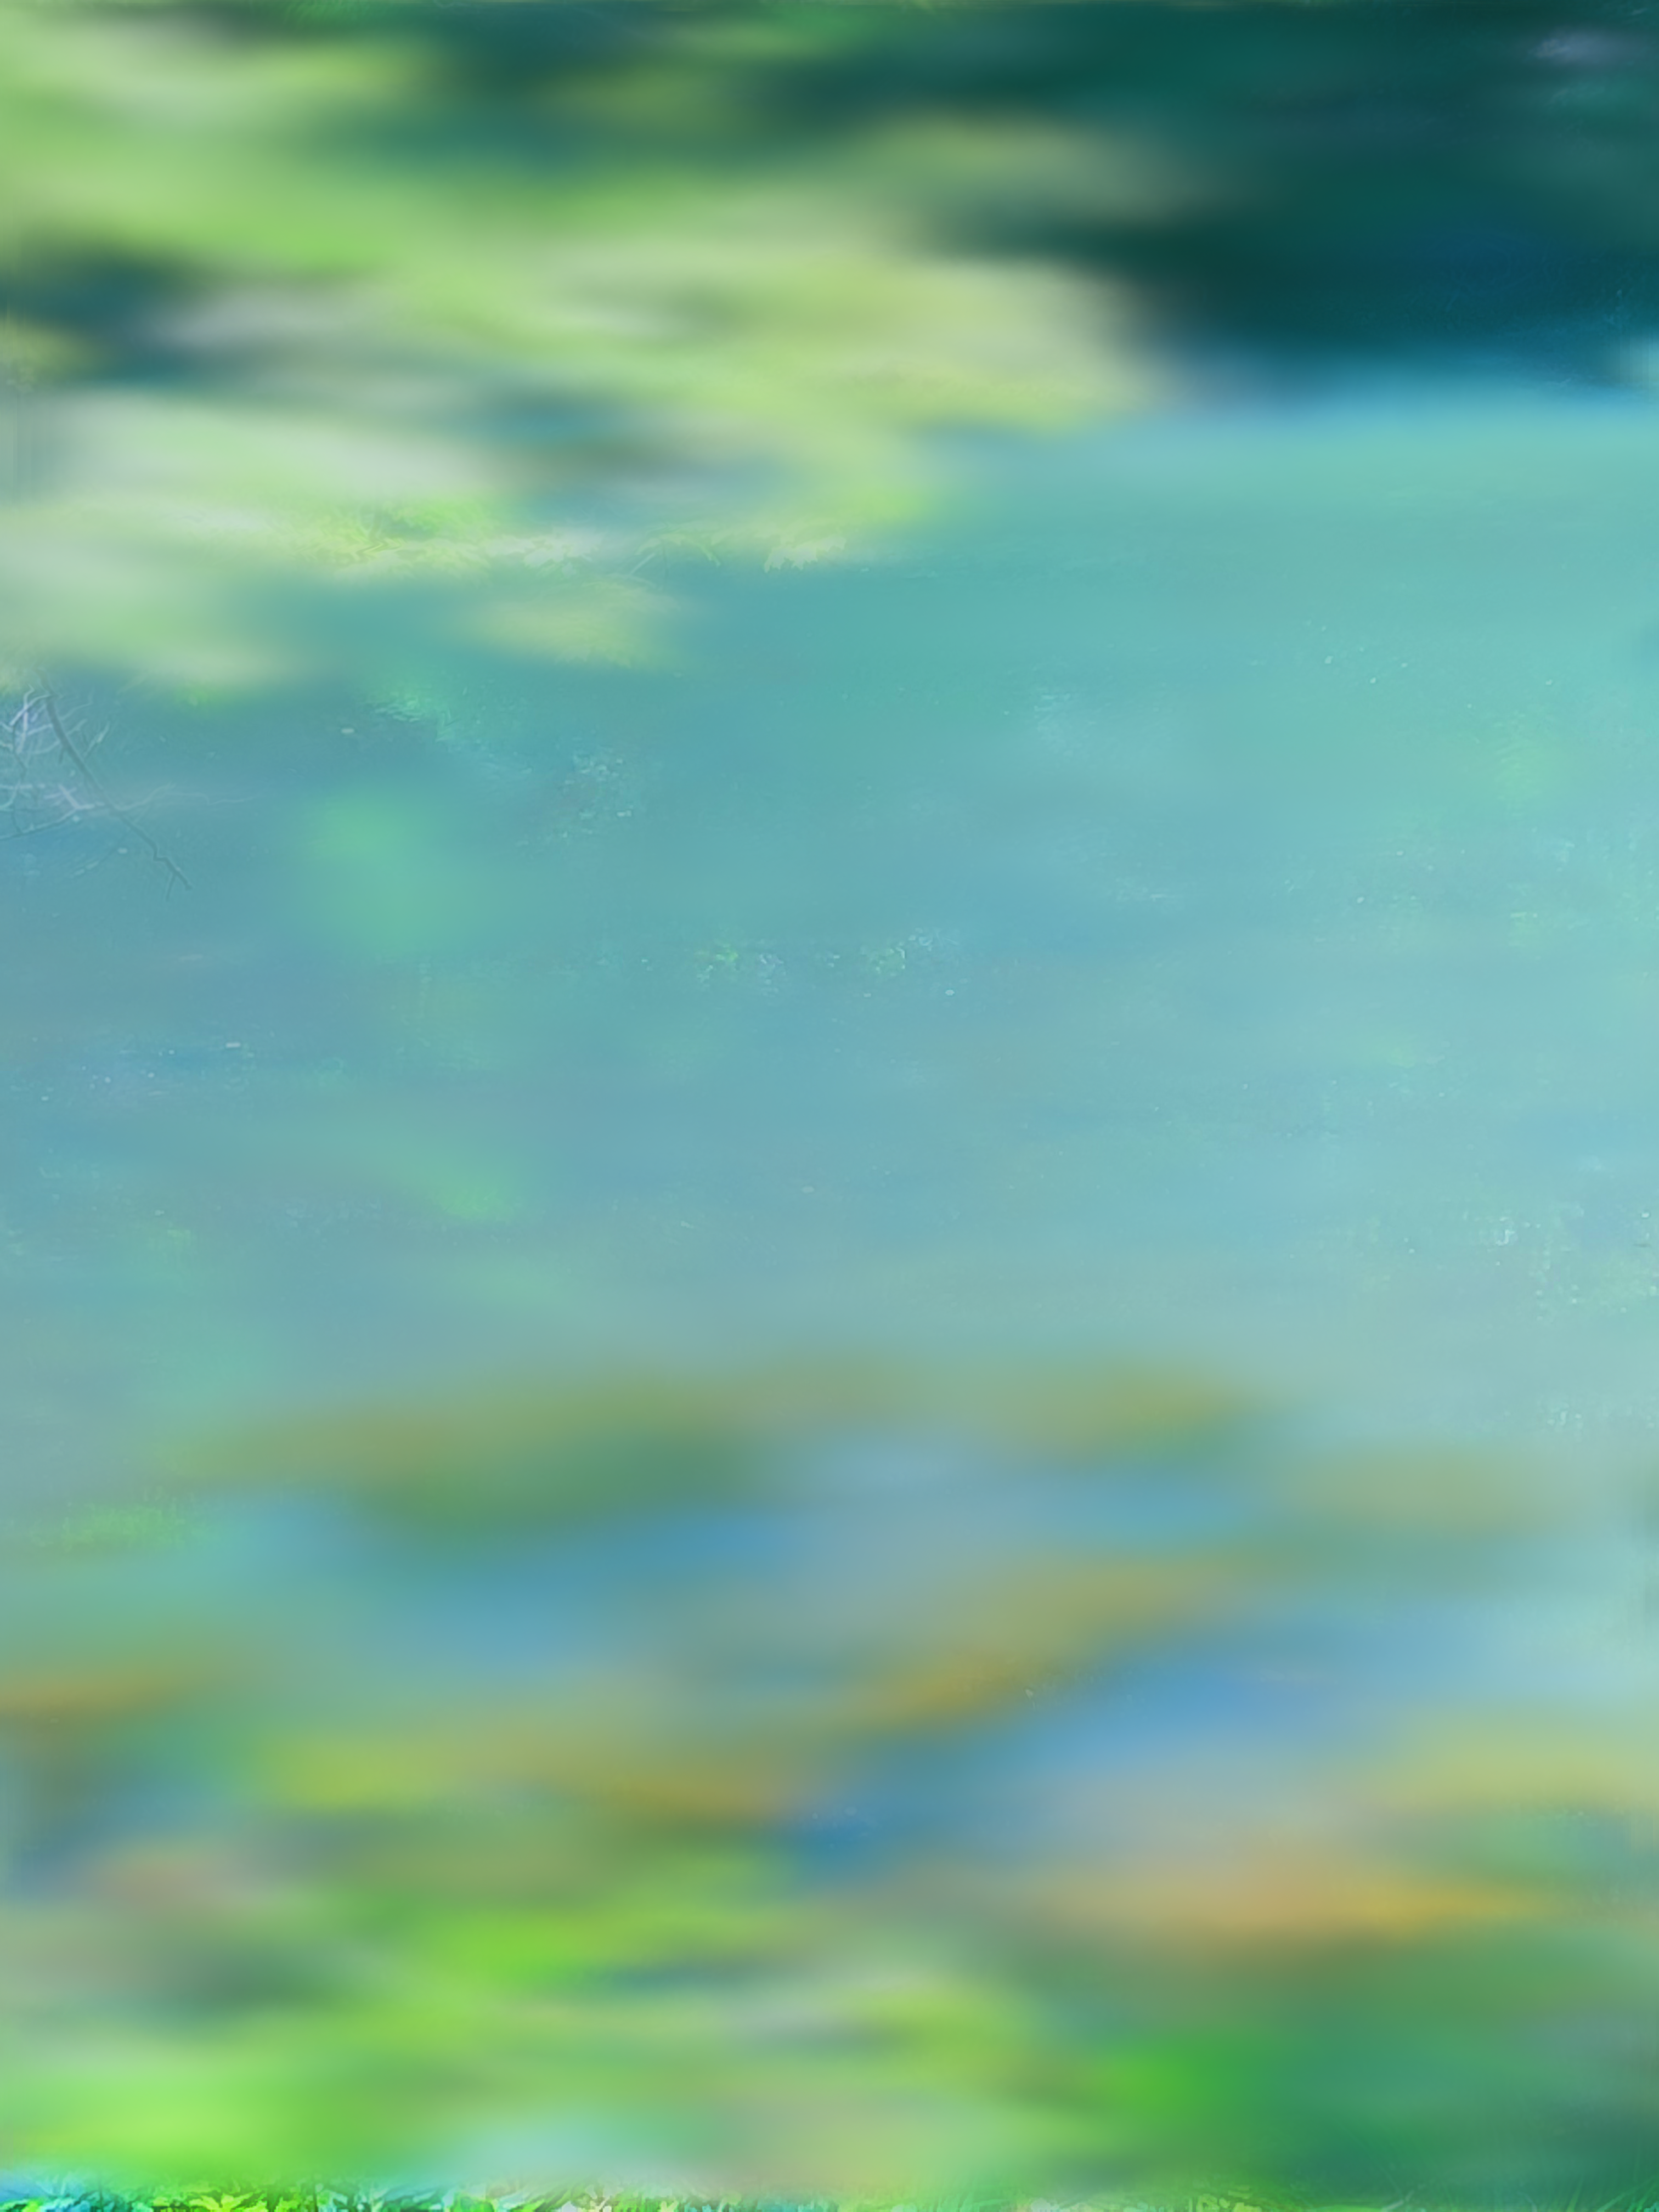 blurry image of foliage against water, shades of light blue and green